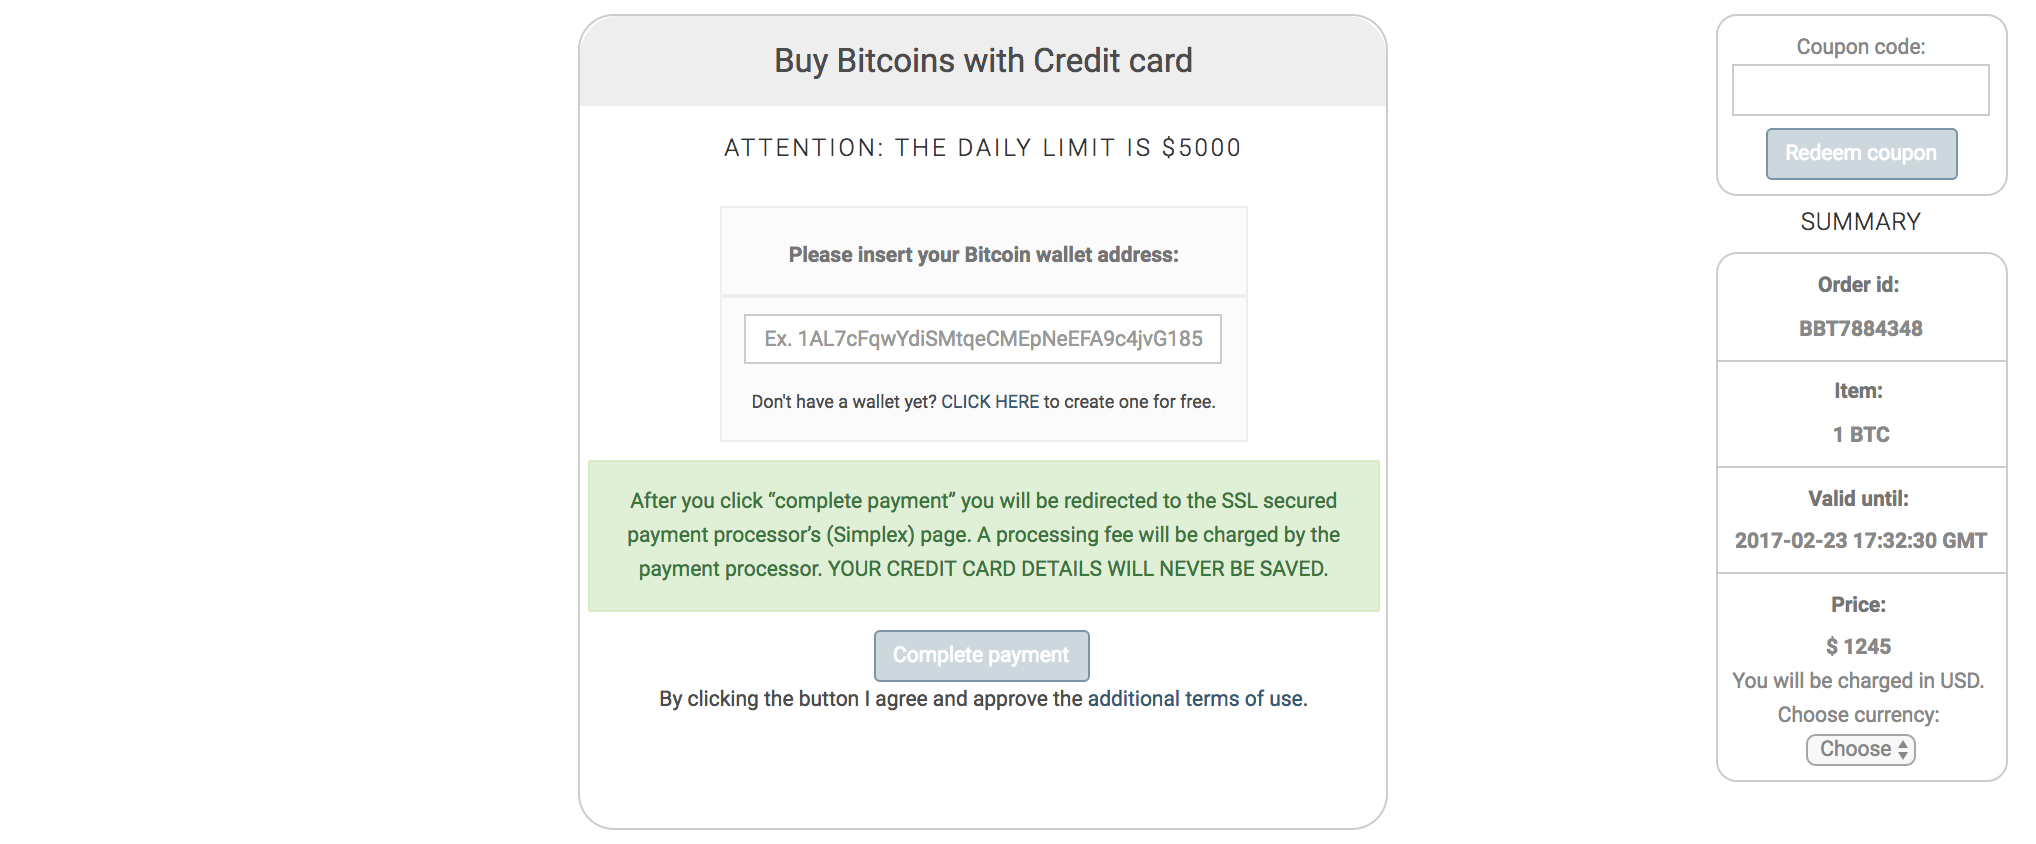 Buy bitcoins instantly with debit card no verification req crypto